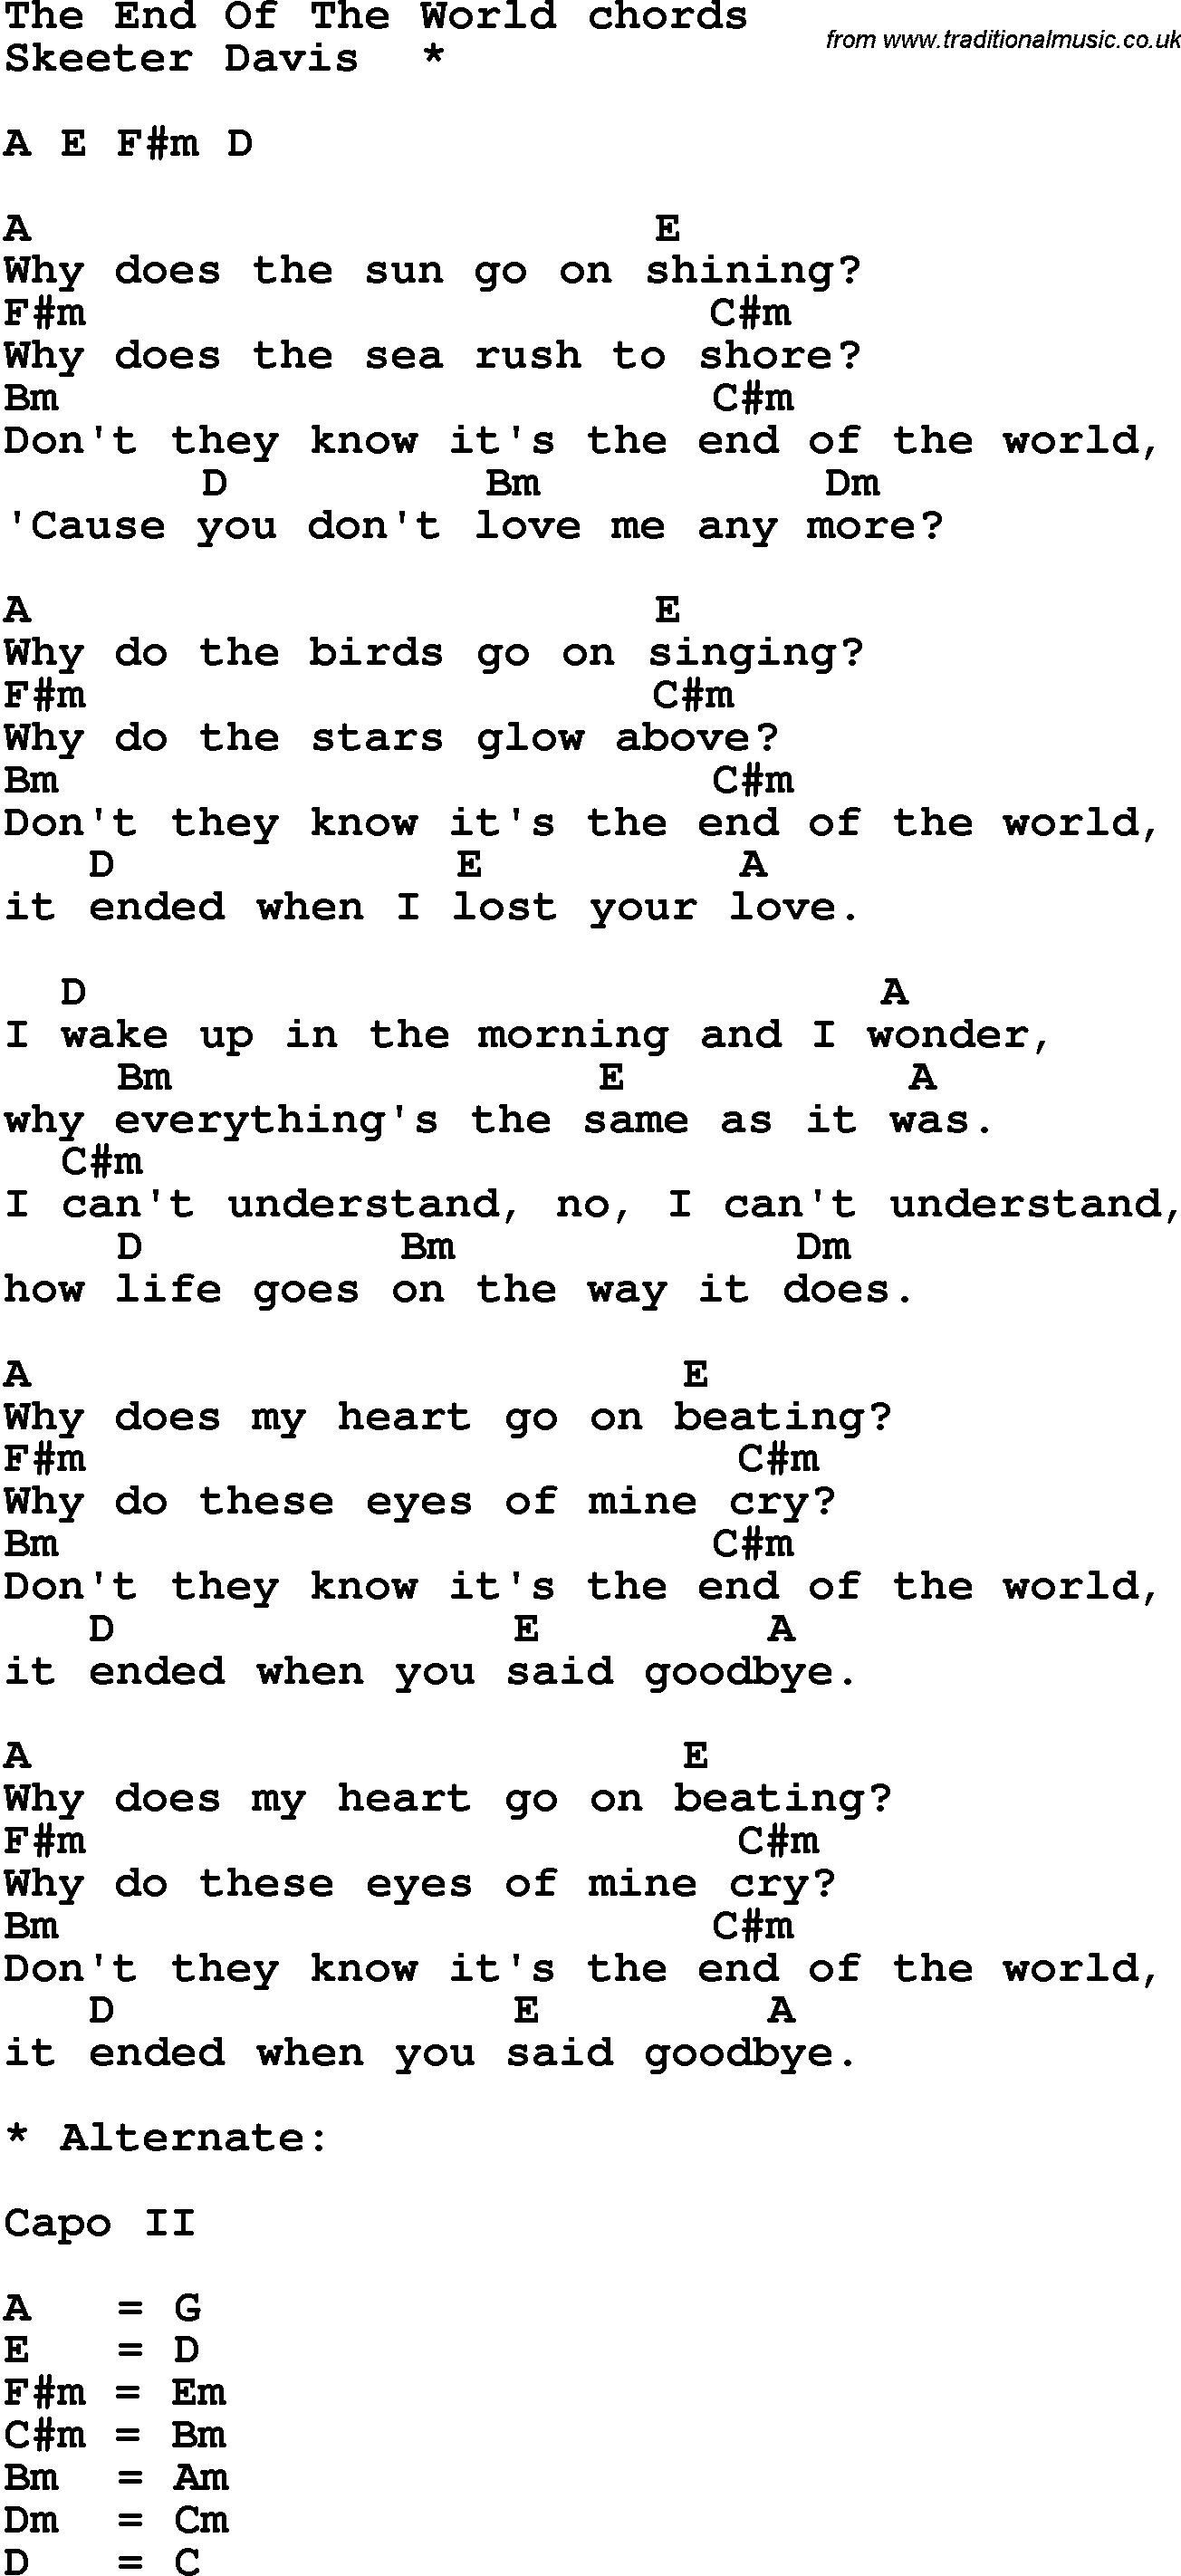 Song Lyrics with guitar chords for The End Of The World